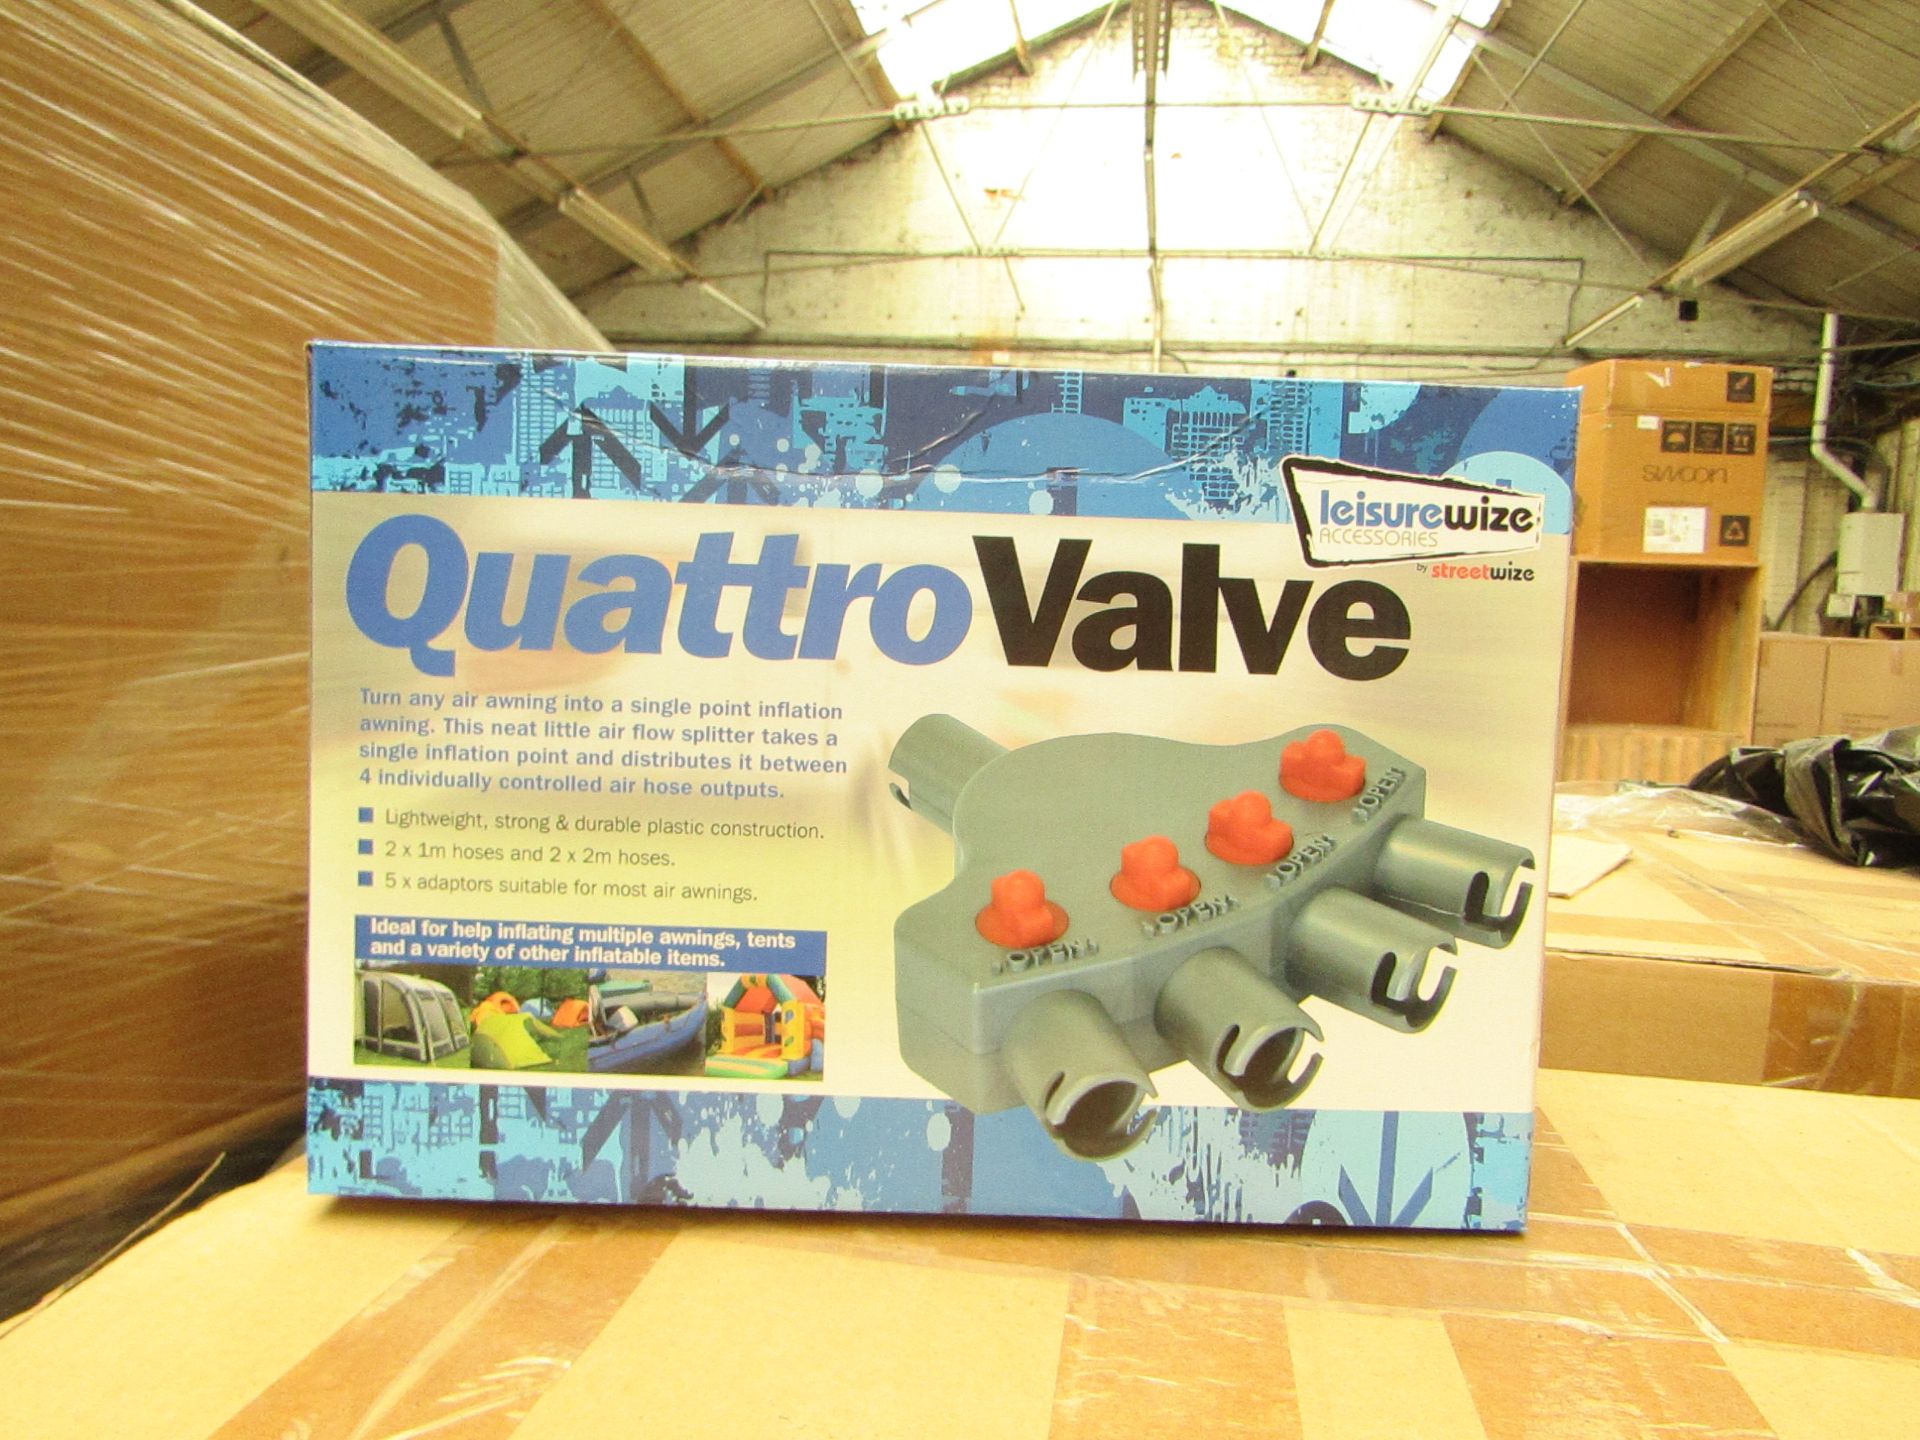 Streetwize quattro valve, 4 way valve air awning tent inflation adapter kit, new and boxed.